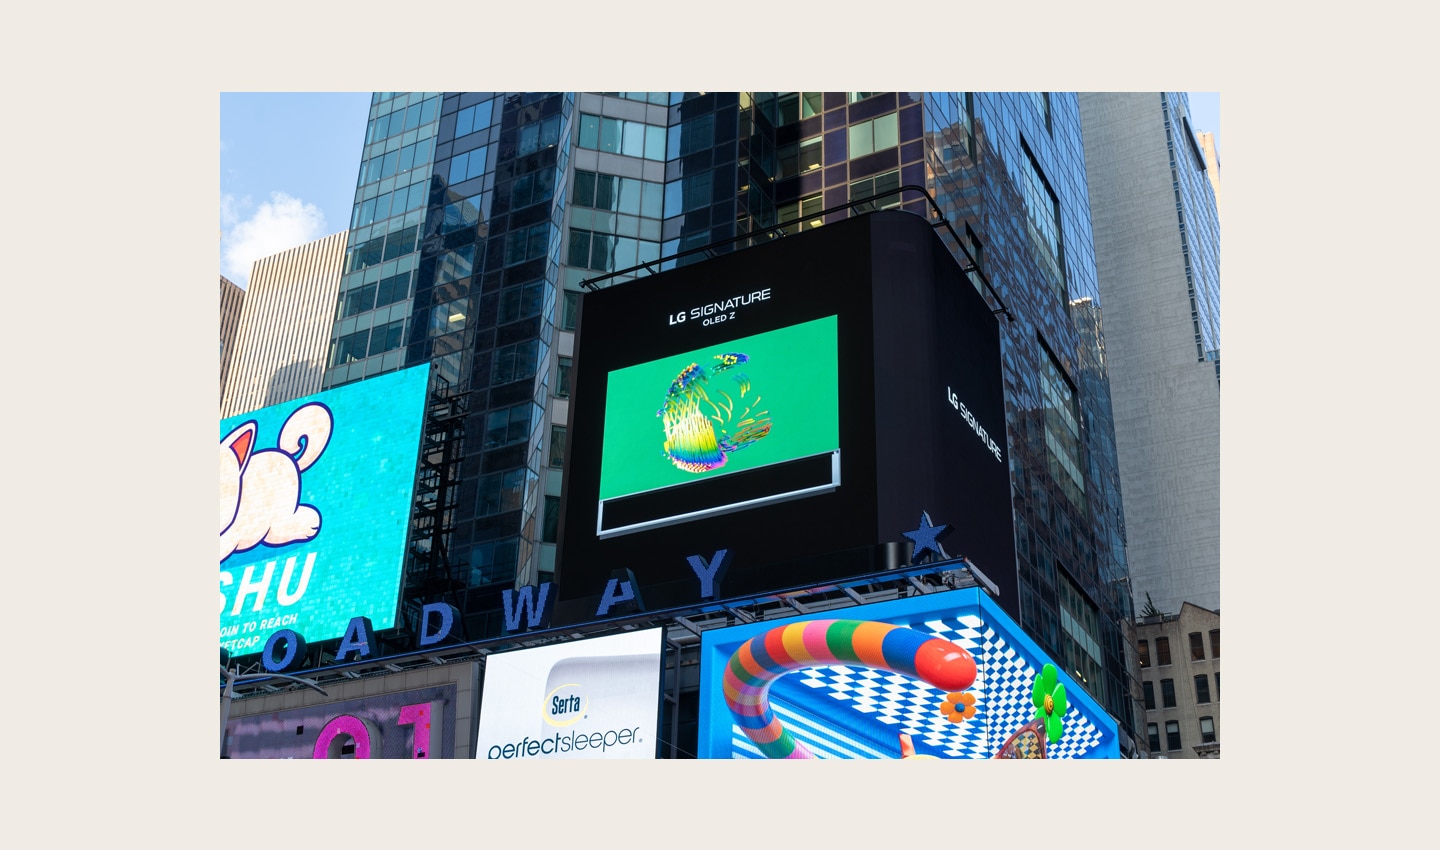 LG's digital billboard in Time Square, New York displaying an animation for LG SIGNATURE OLED Z representing the infinite and rich color of the product